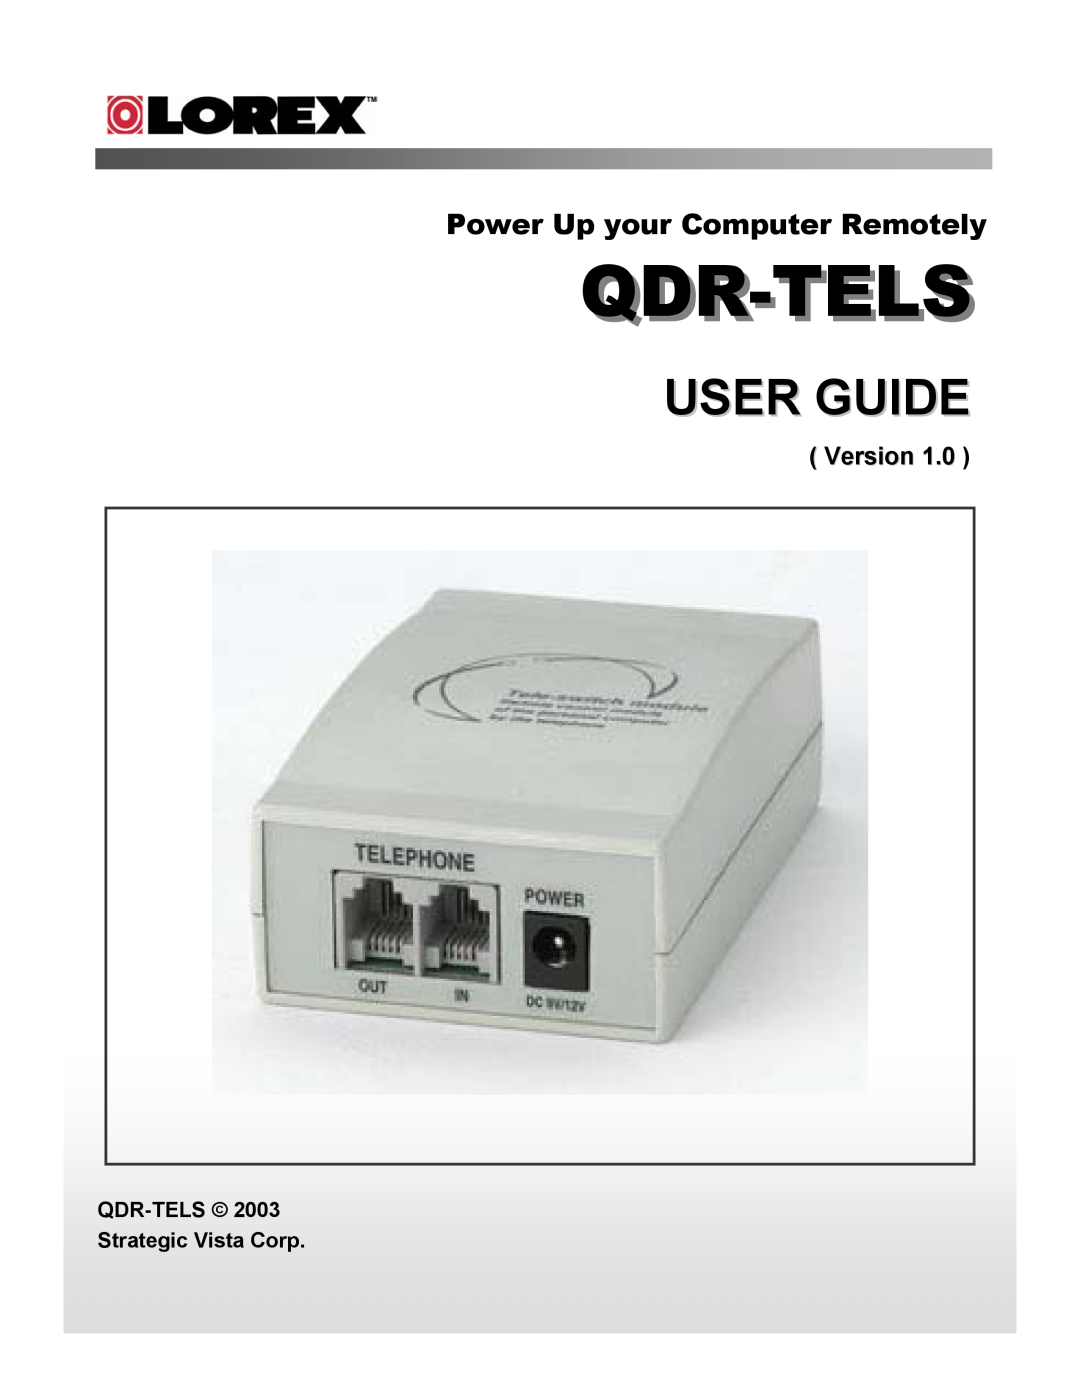 LOREX Technology manual Version, QDR-TELS Strategic Vista Corp, Qdr-Tels, User Guide, Power Up your Computer Remotely 